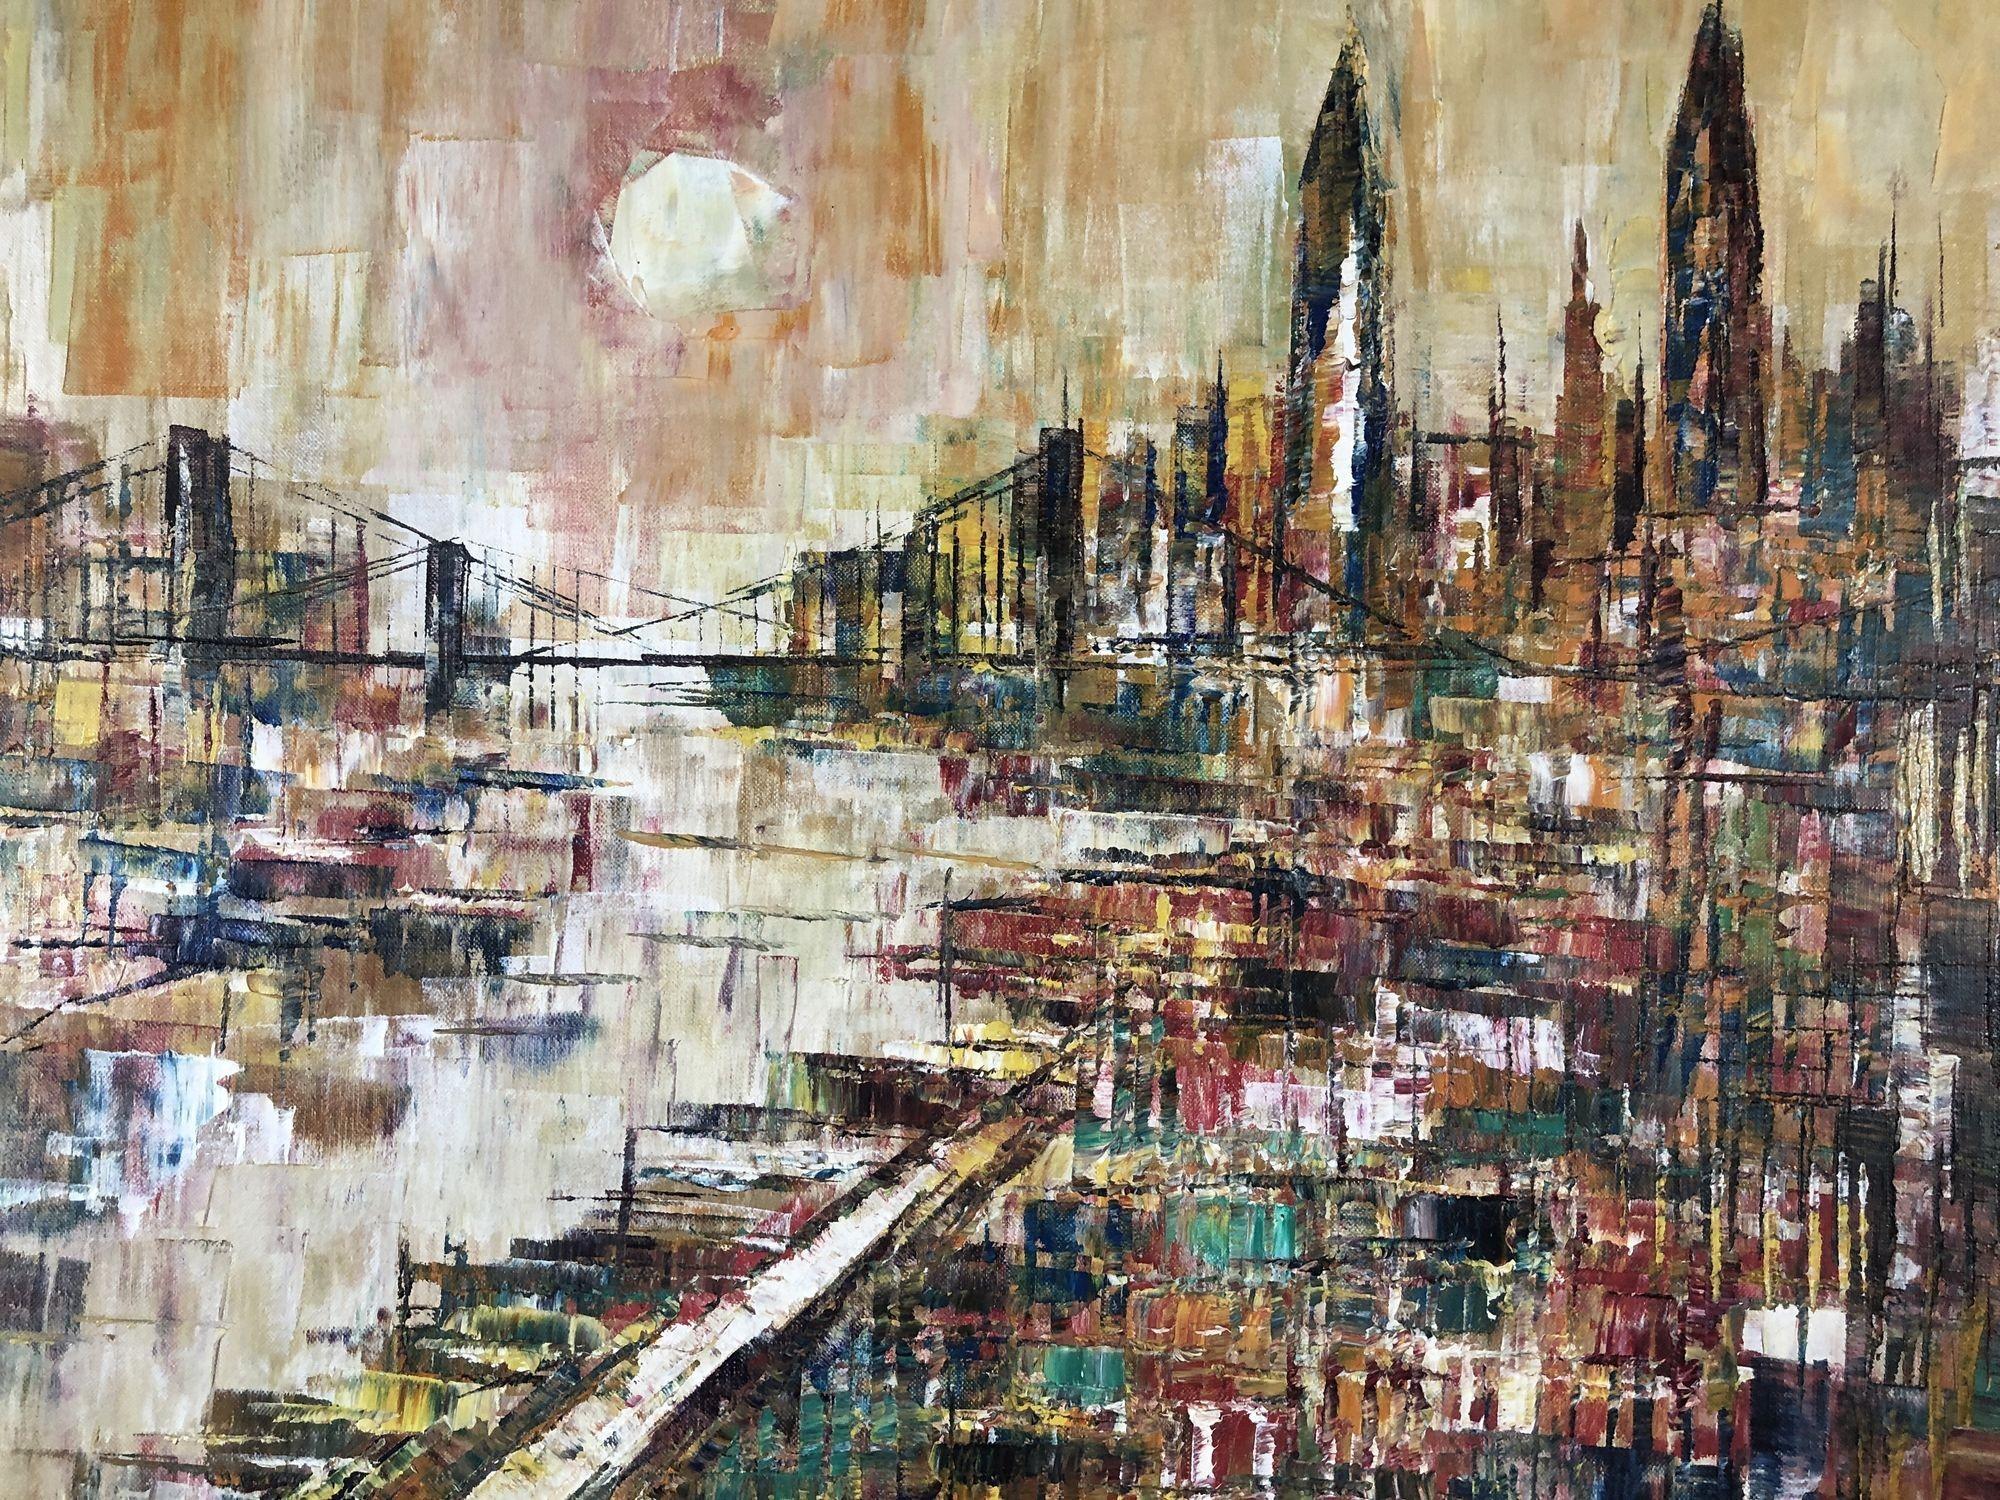 Mid Century contemporary artwork oil painting of city skyline with the sun setting over a bridge, signed by M. Dick. This painting is in a wooden frame with scalloped details and gold accents.

Dimensions: 32.5x 44.5
Frame Dimensions: 3.5